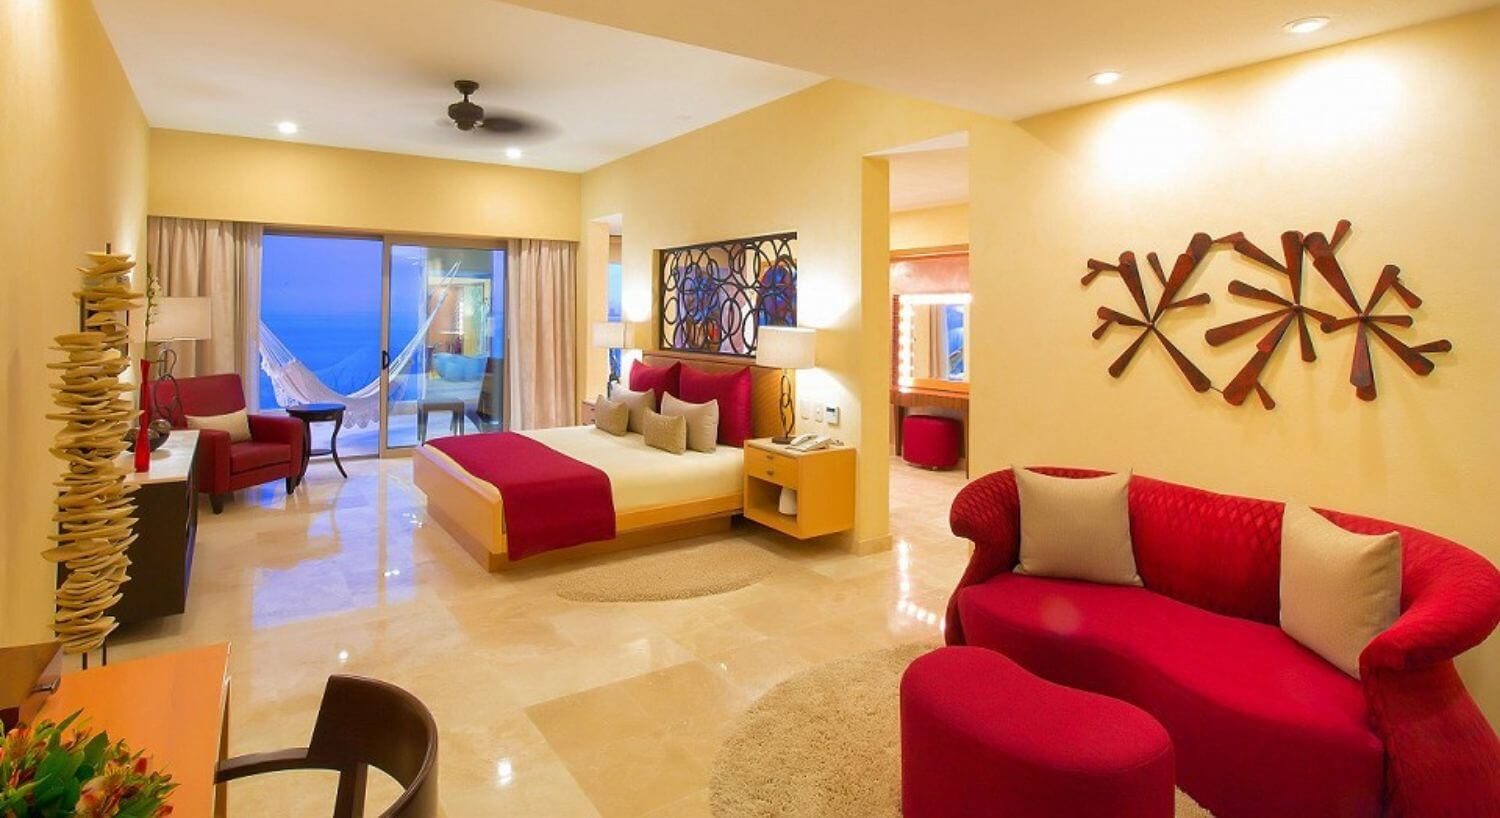 A large bedroom and sitting room with a King bed with white, red and tan bedding, nightstands on either side with lamps, a red loveseat and ottoman in the sitting area with a desk and chair against one wall. Sliding glass doors open out to a private balcony with hammock and patio furniture, and beautiful ocean views.